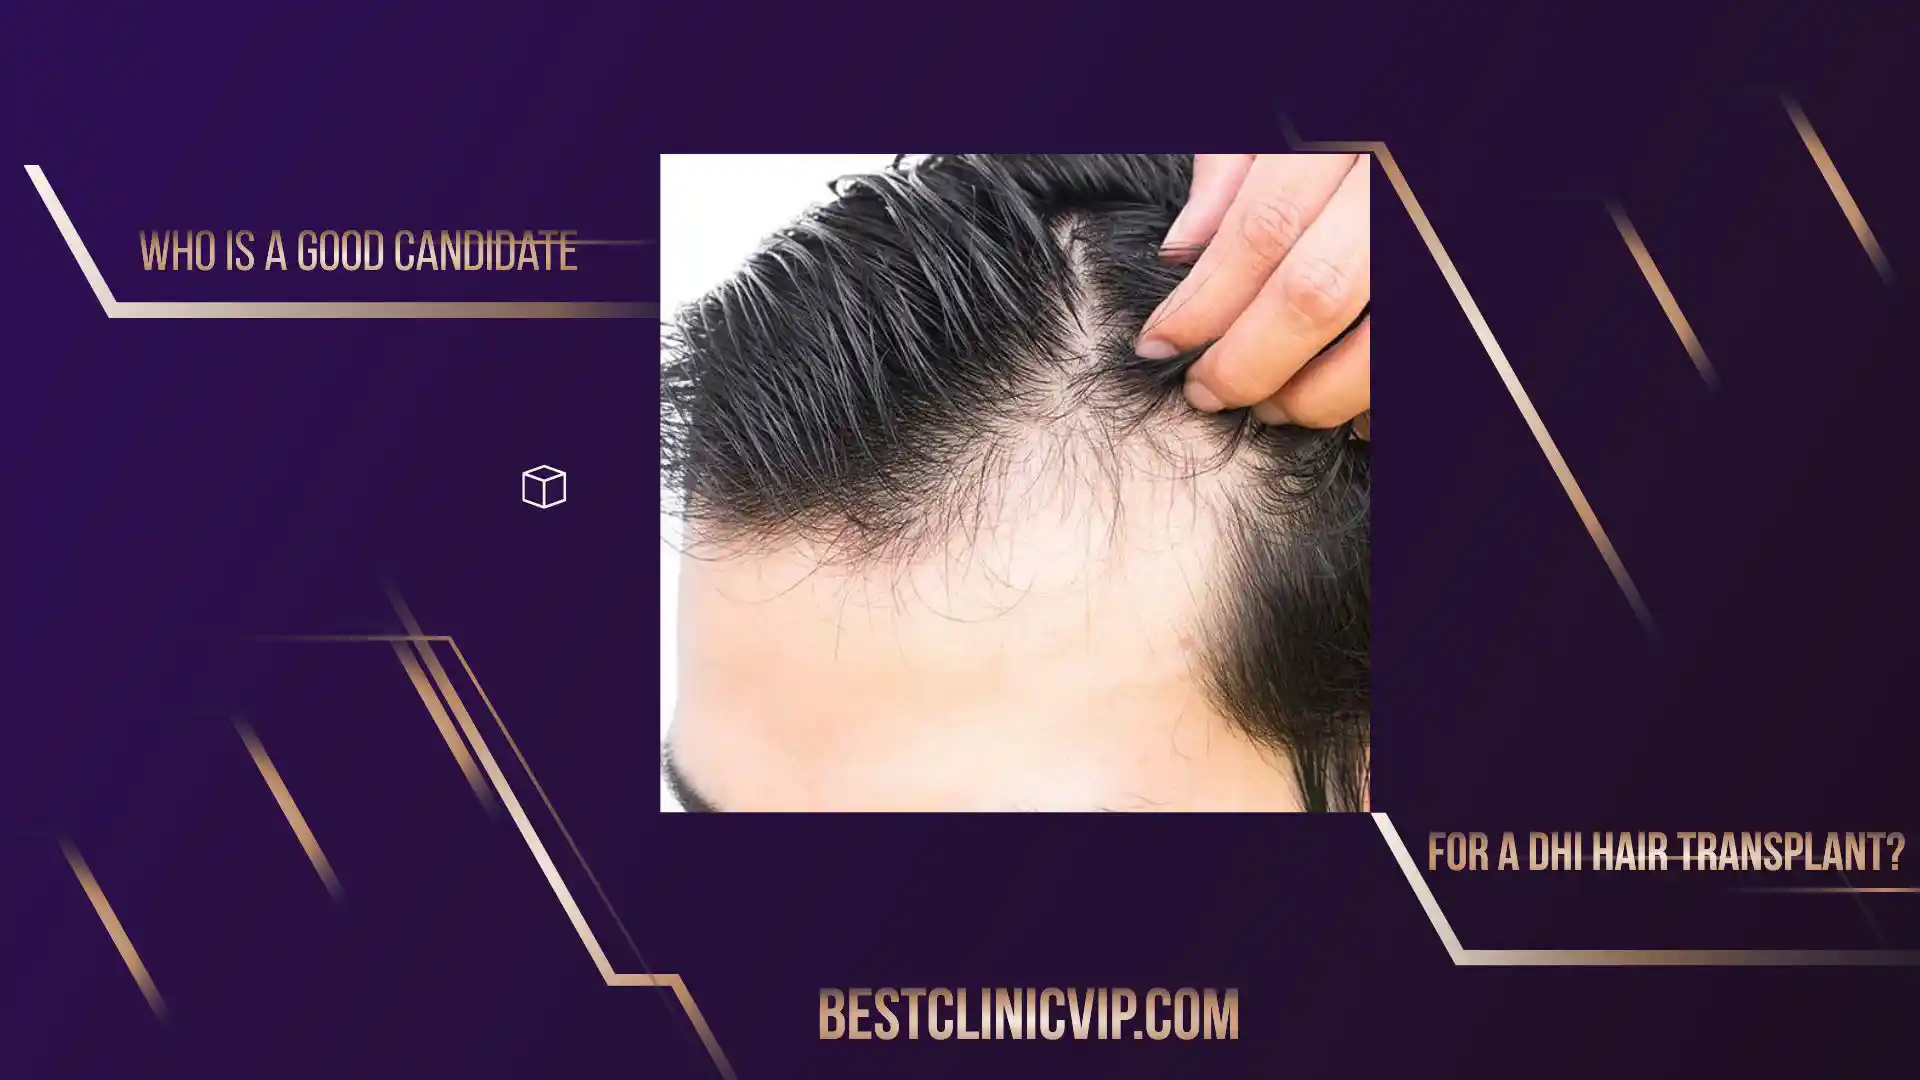 Who is a good candidate for a DHI hair transplant?